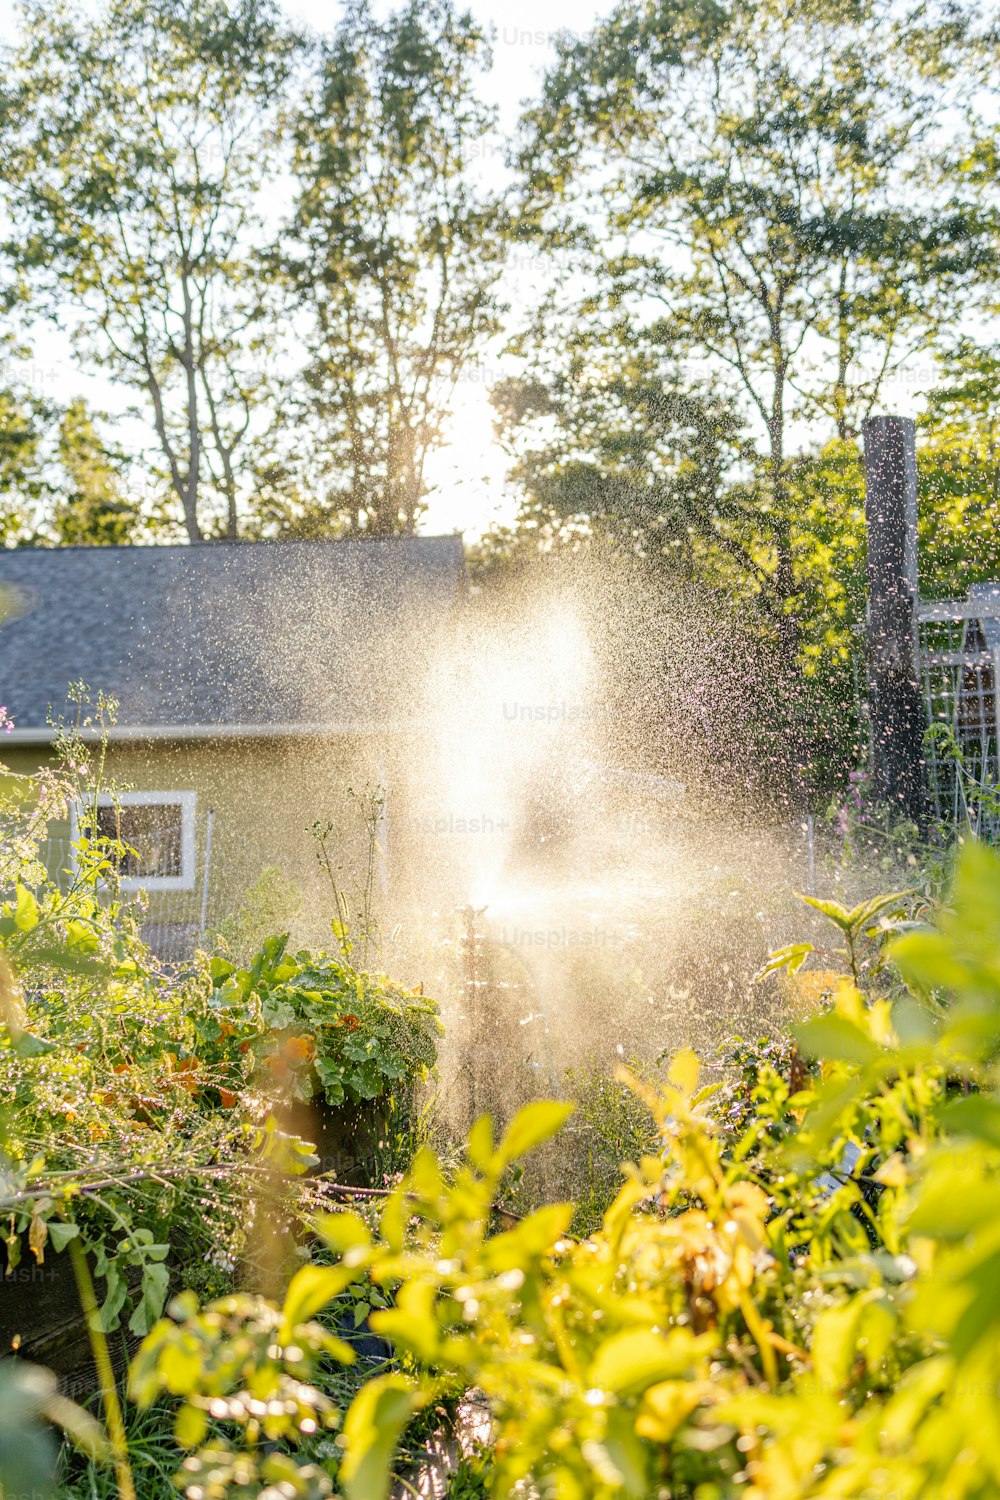 a sprinkle is spraying water on a house